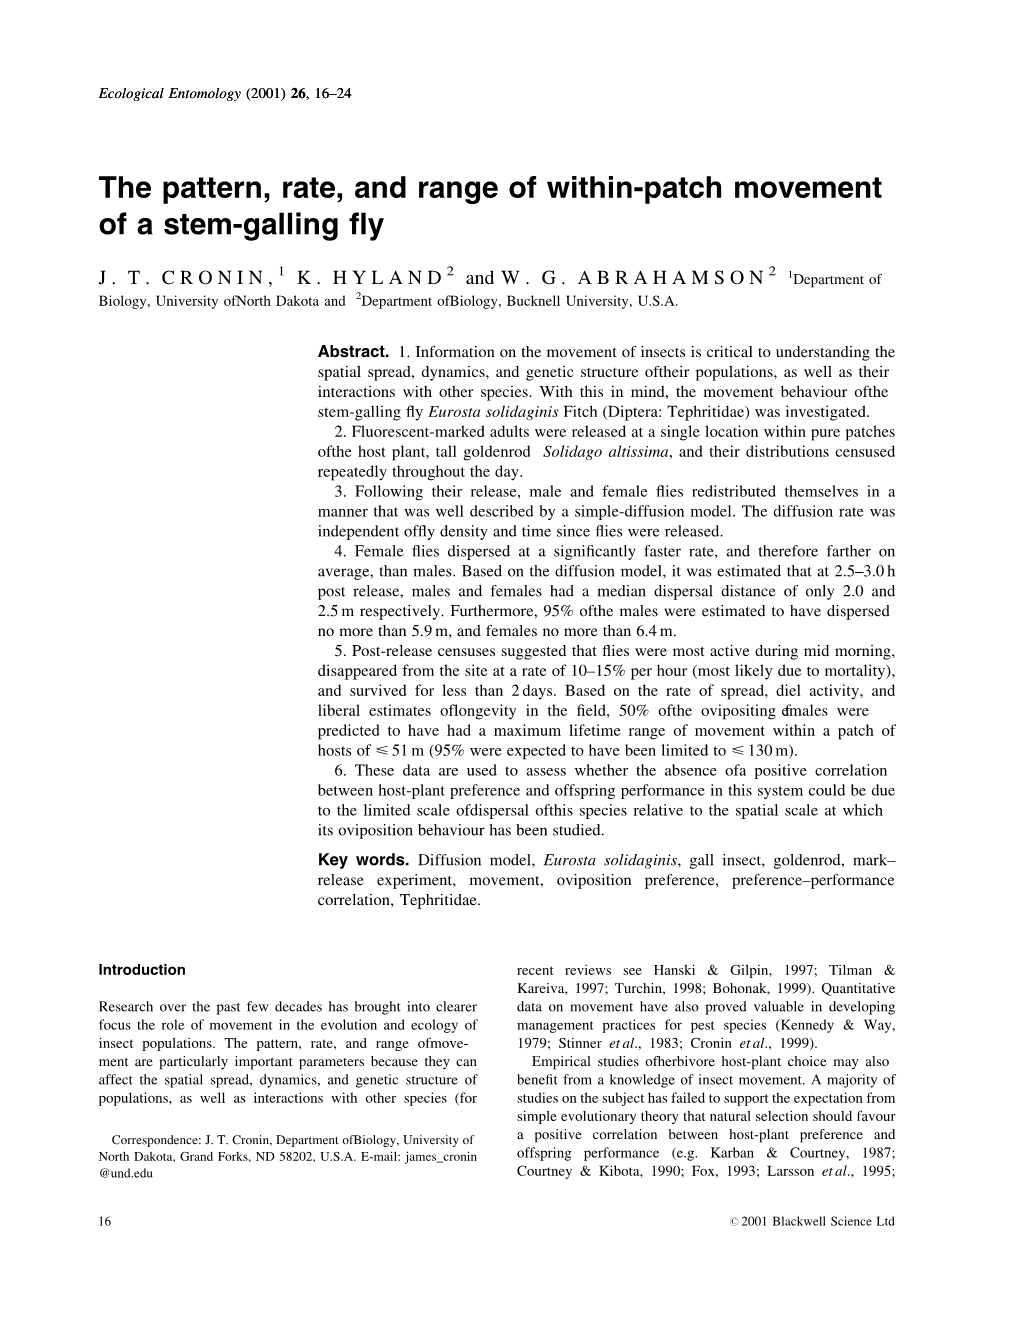 The Pattern, Rate, and Range of Within-Patch Movement of a Stem-Galling ¯Y